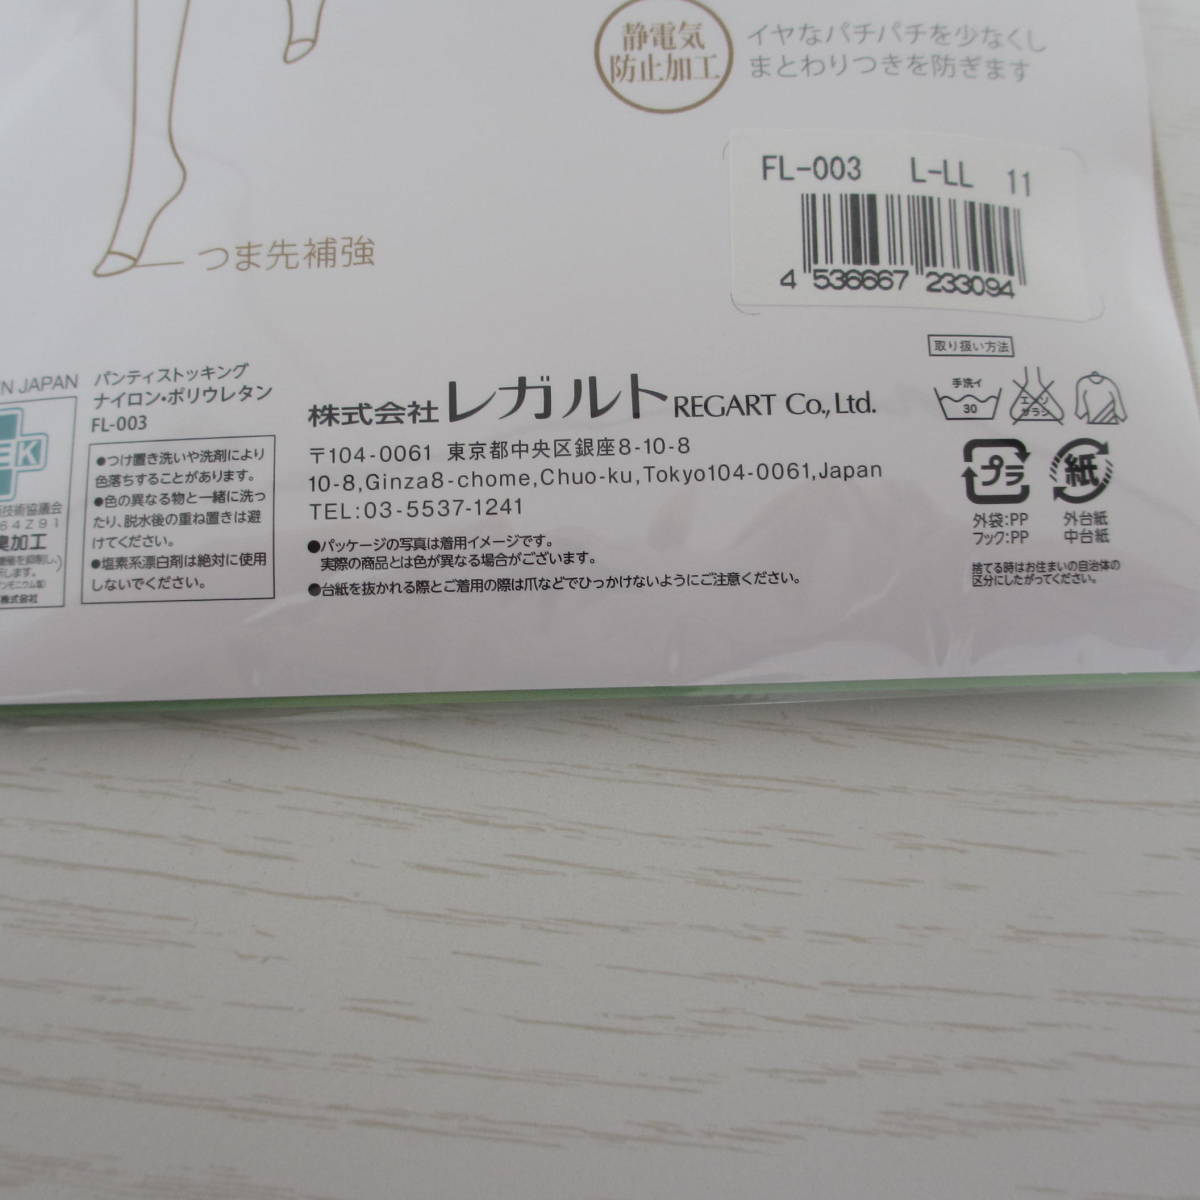  unused *garuto* support bread ti stockings * lady's * woman * fashion accessories * clothing accessories * made in Japan *L~LL